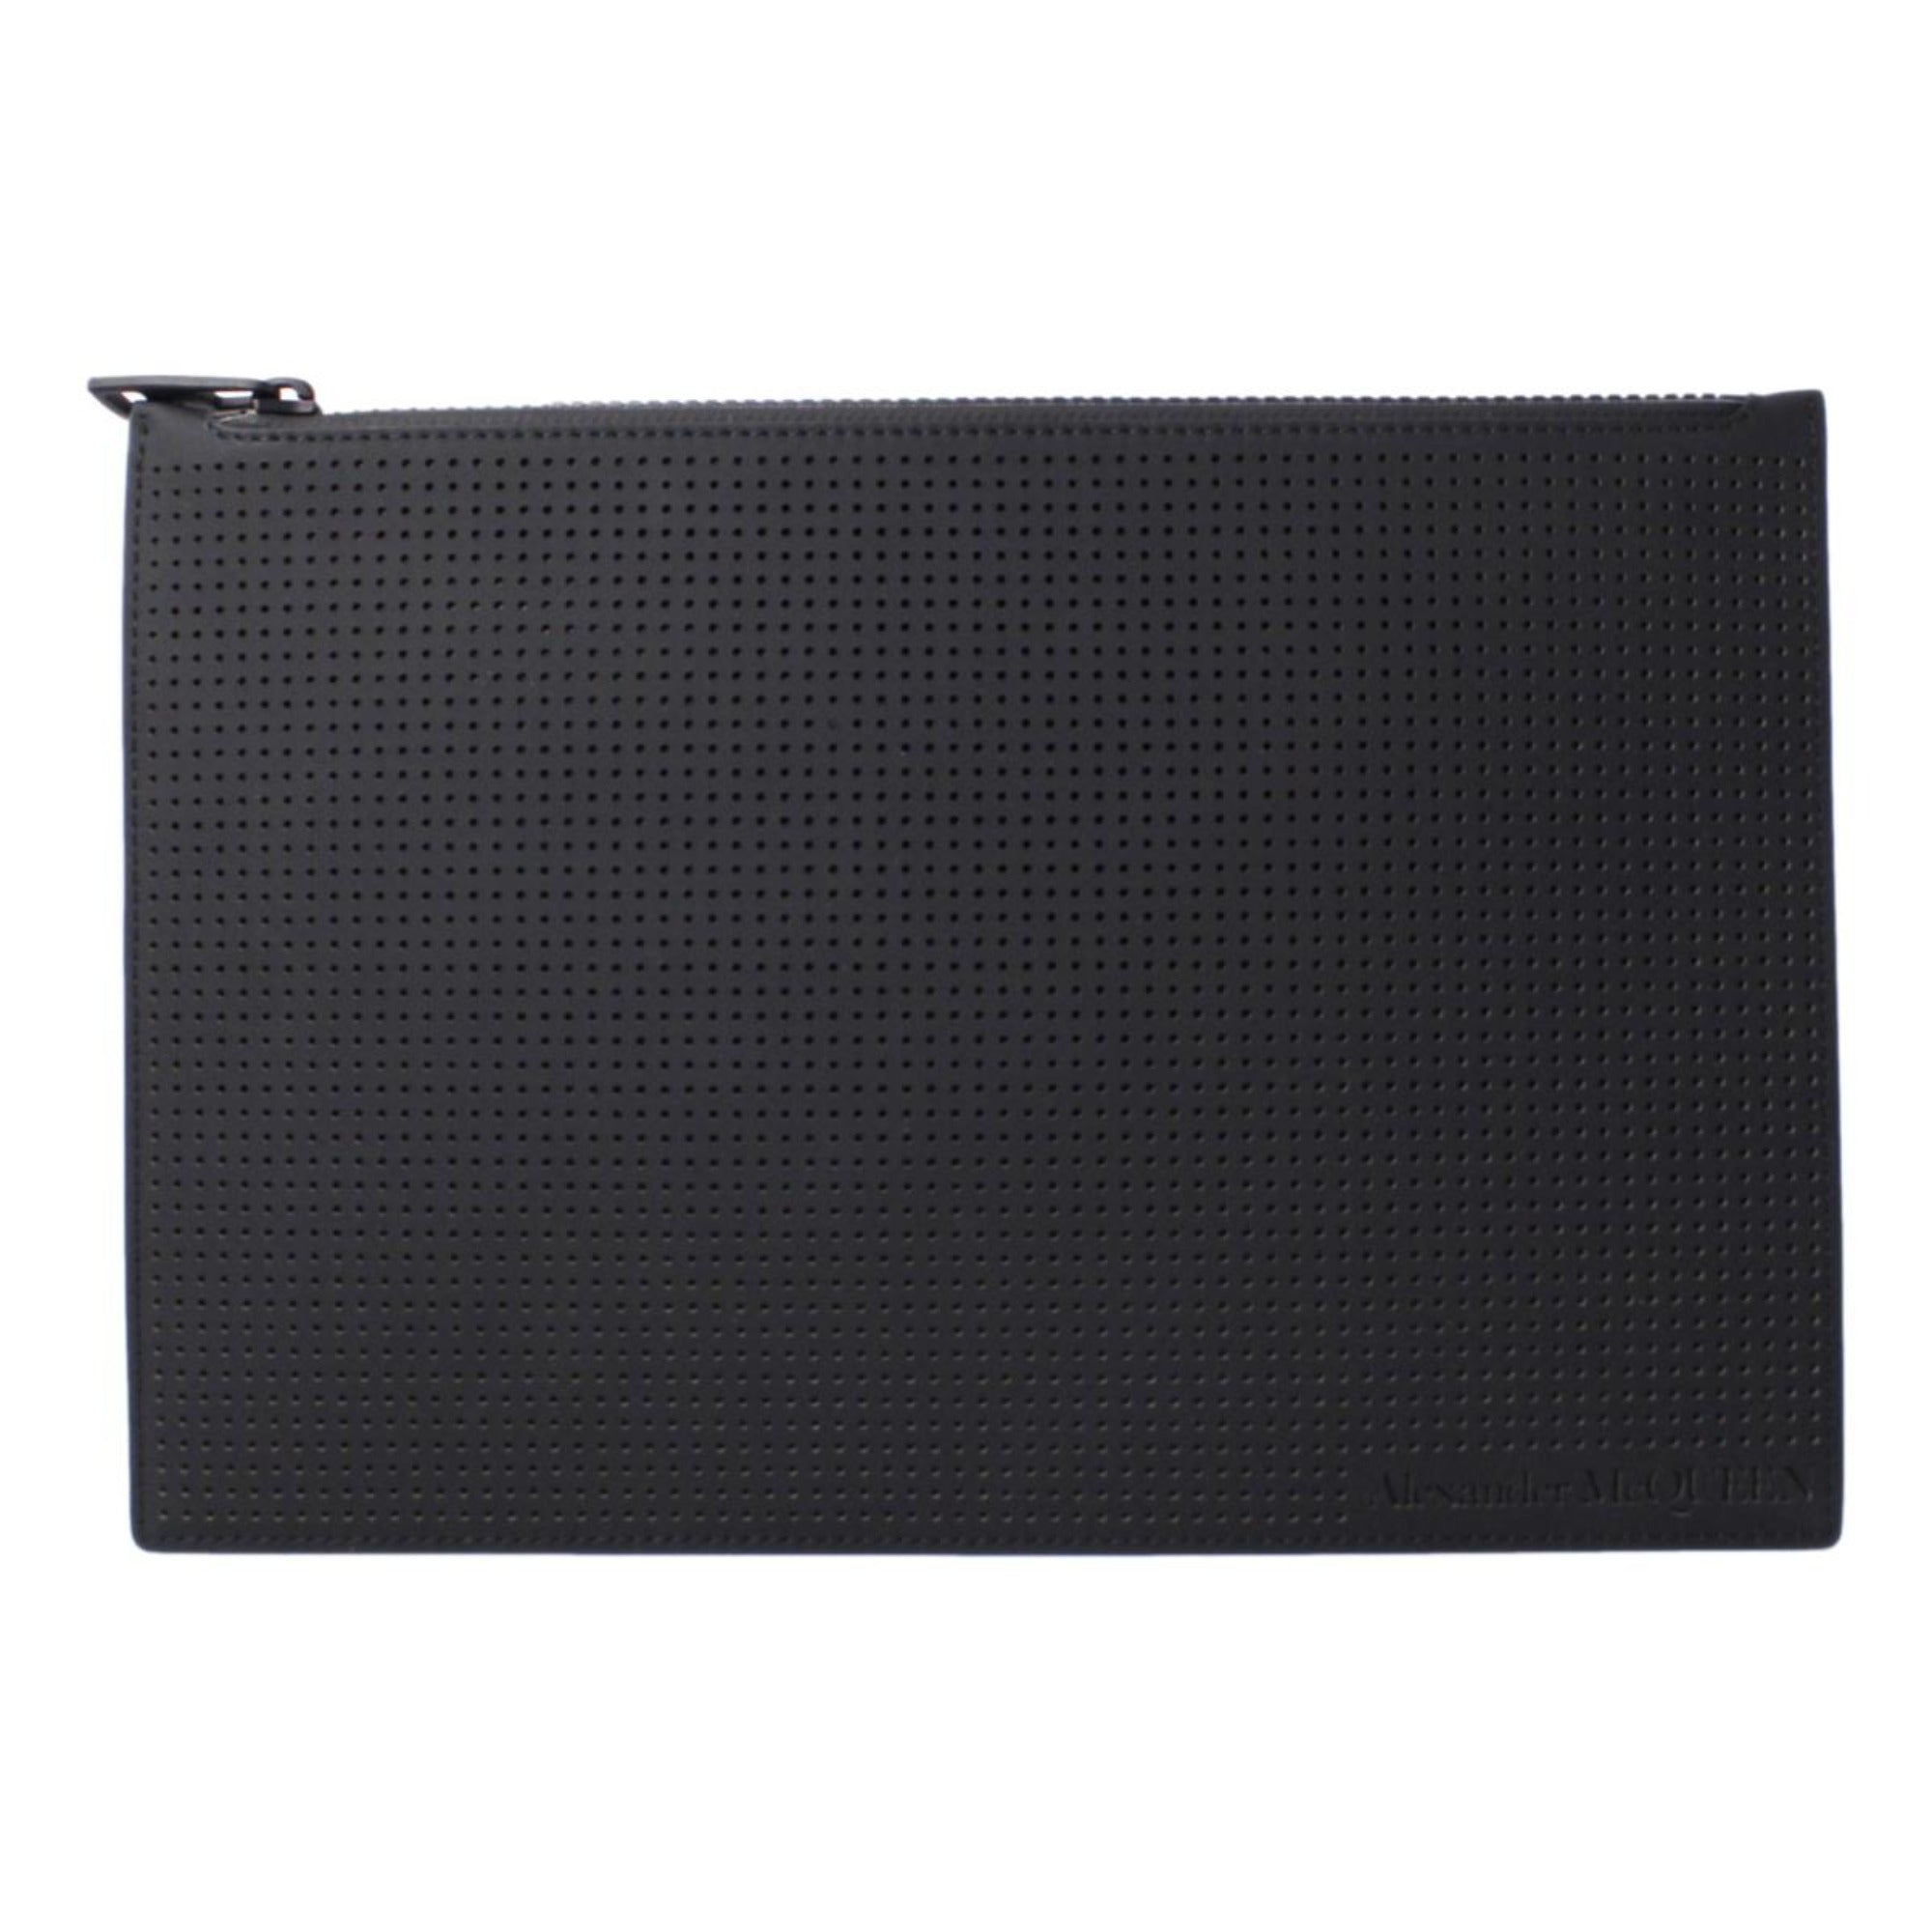 Alexander McQueen Black Leather Perforated Flat Pouch 560472 at_Queen_Bee_of_Beverly_Hills